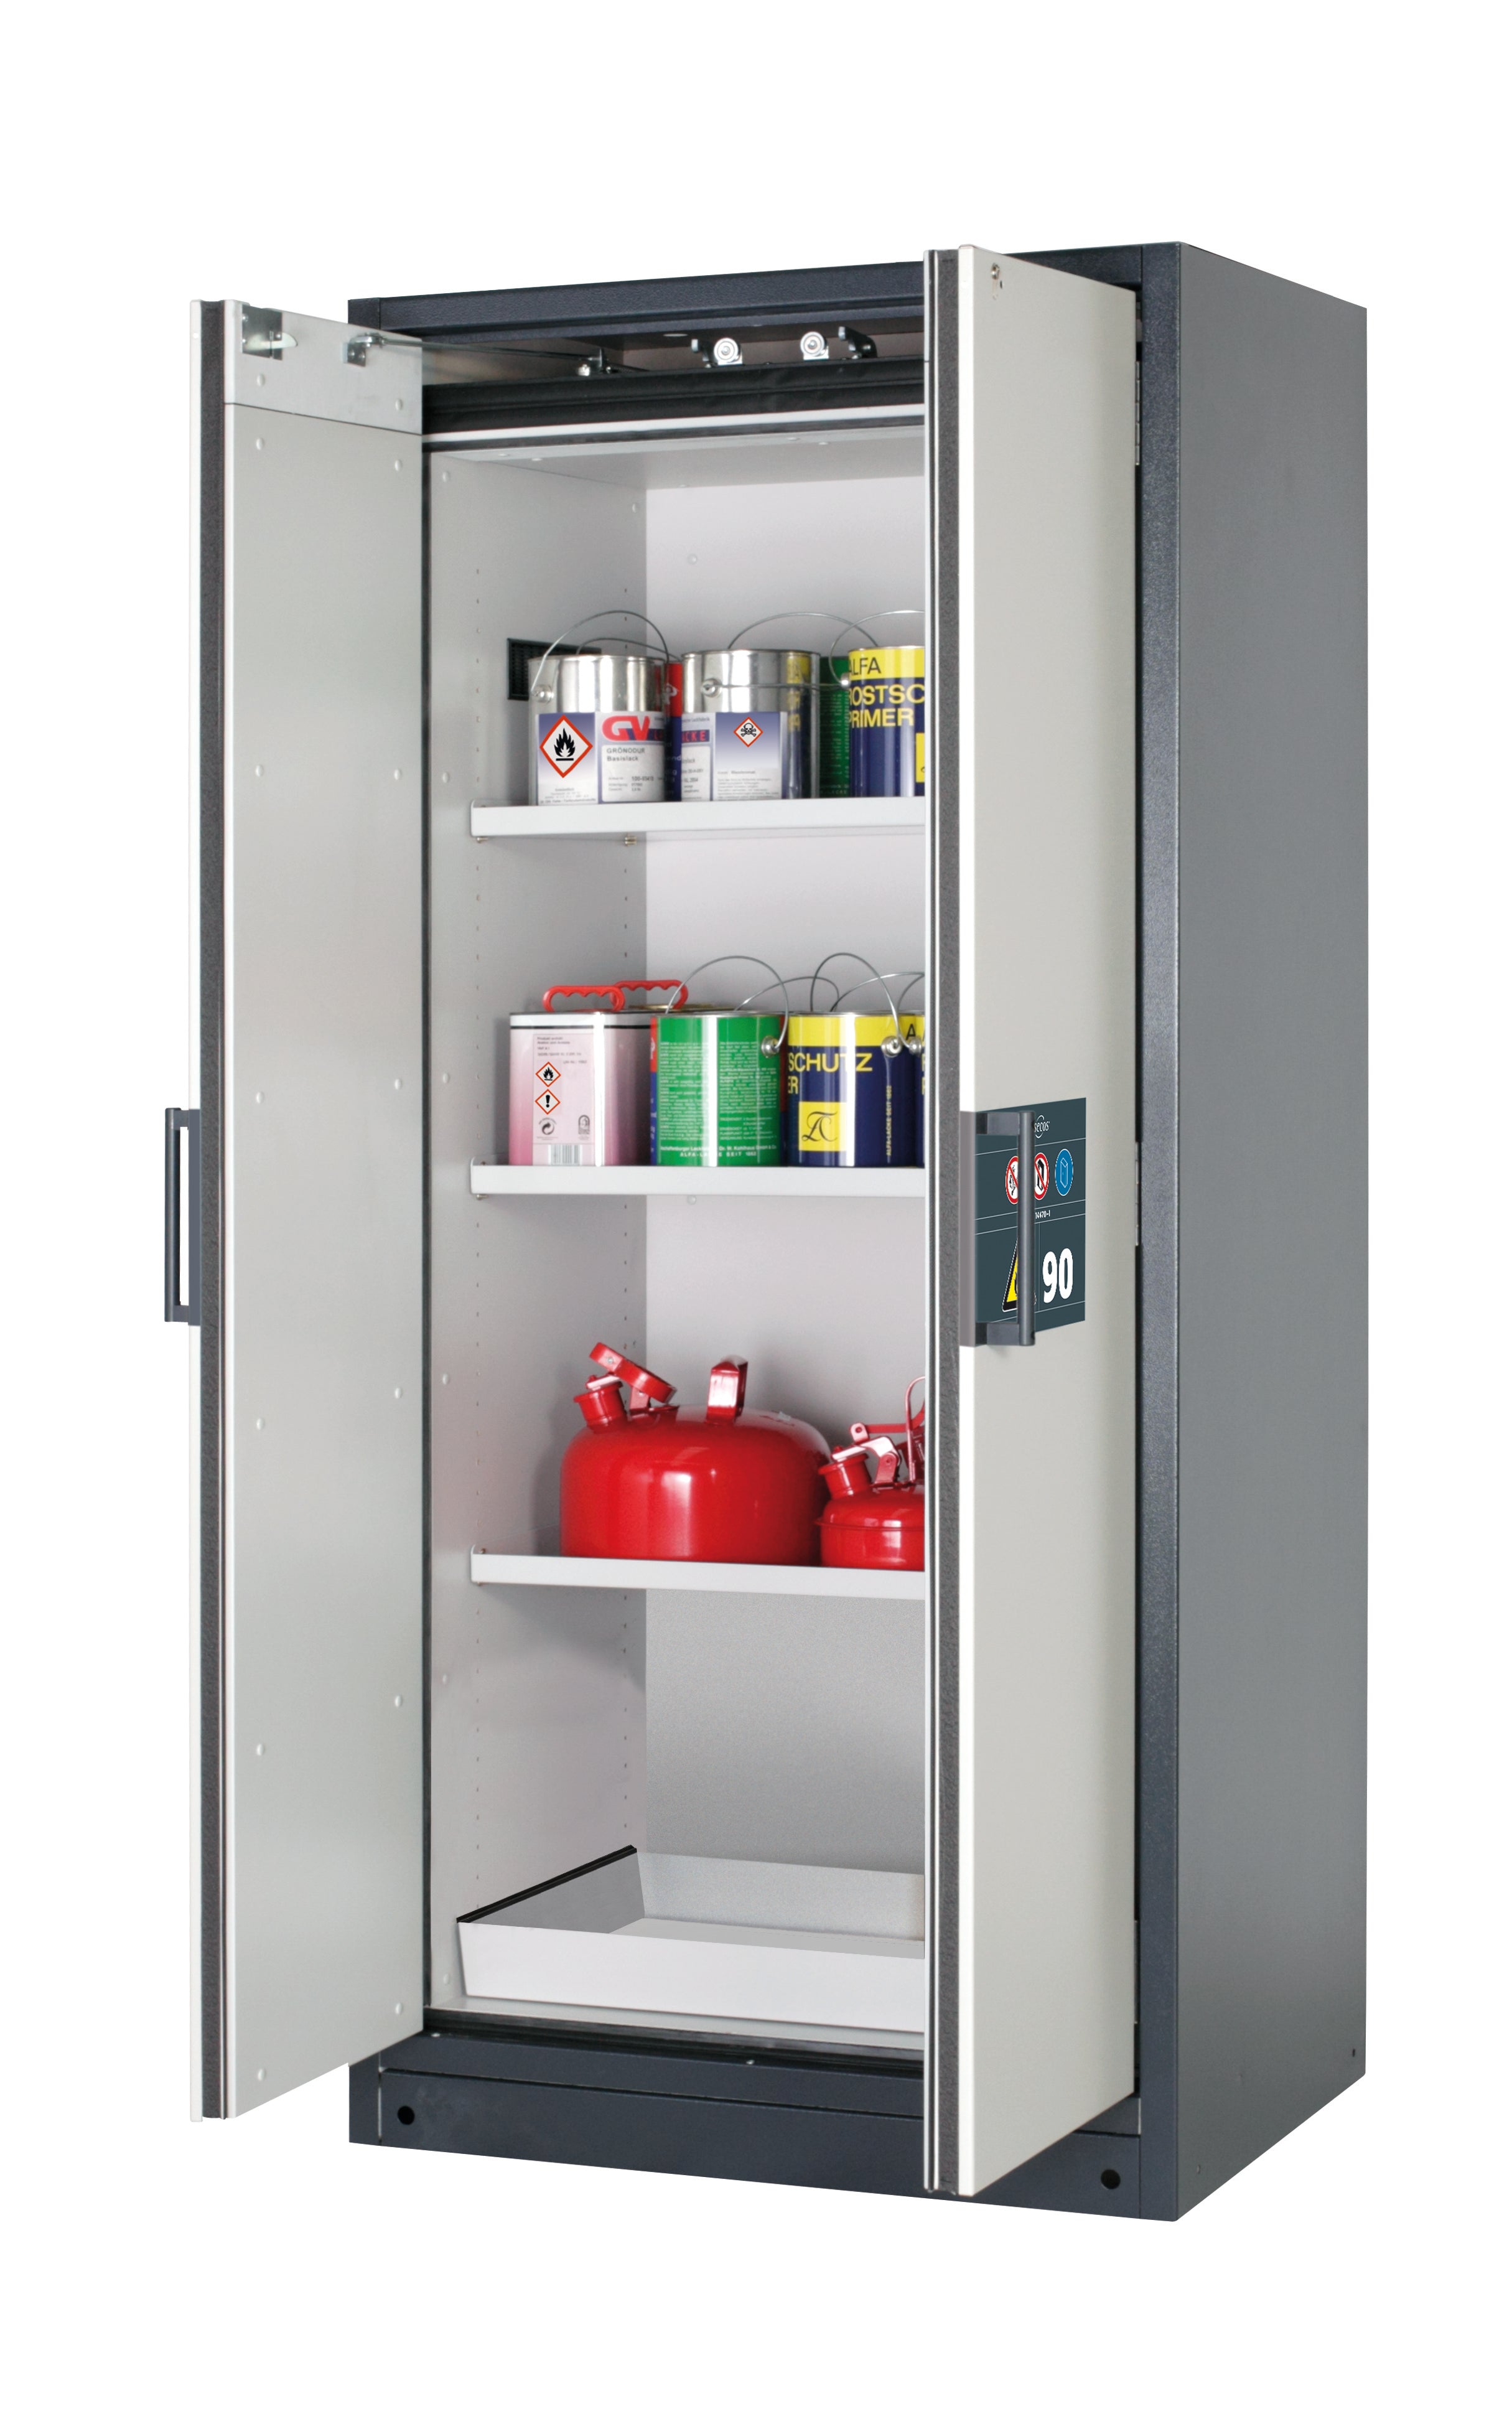 Type 90 safety storage cabinet Q-CLASSIC-90 model Q90.195.090 in light grey RAL 7035 with 3x shelf standard (sheet steel),